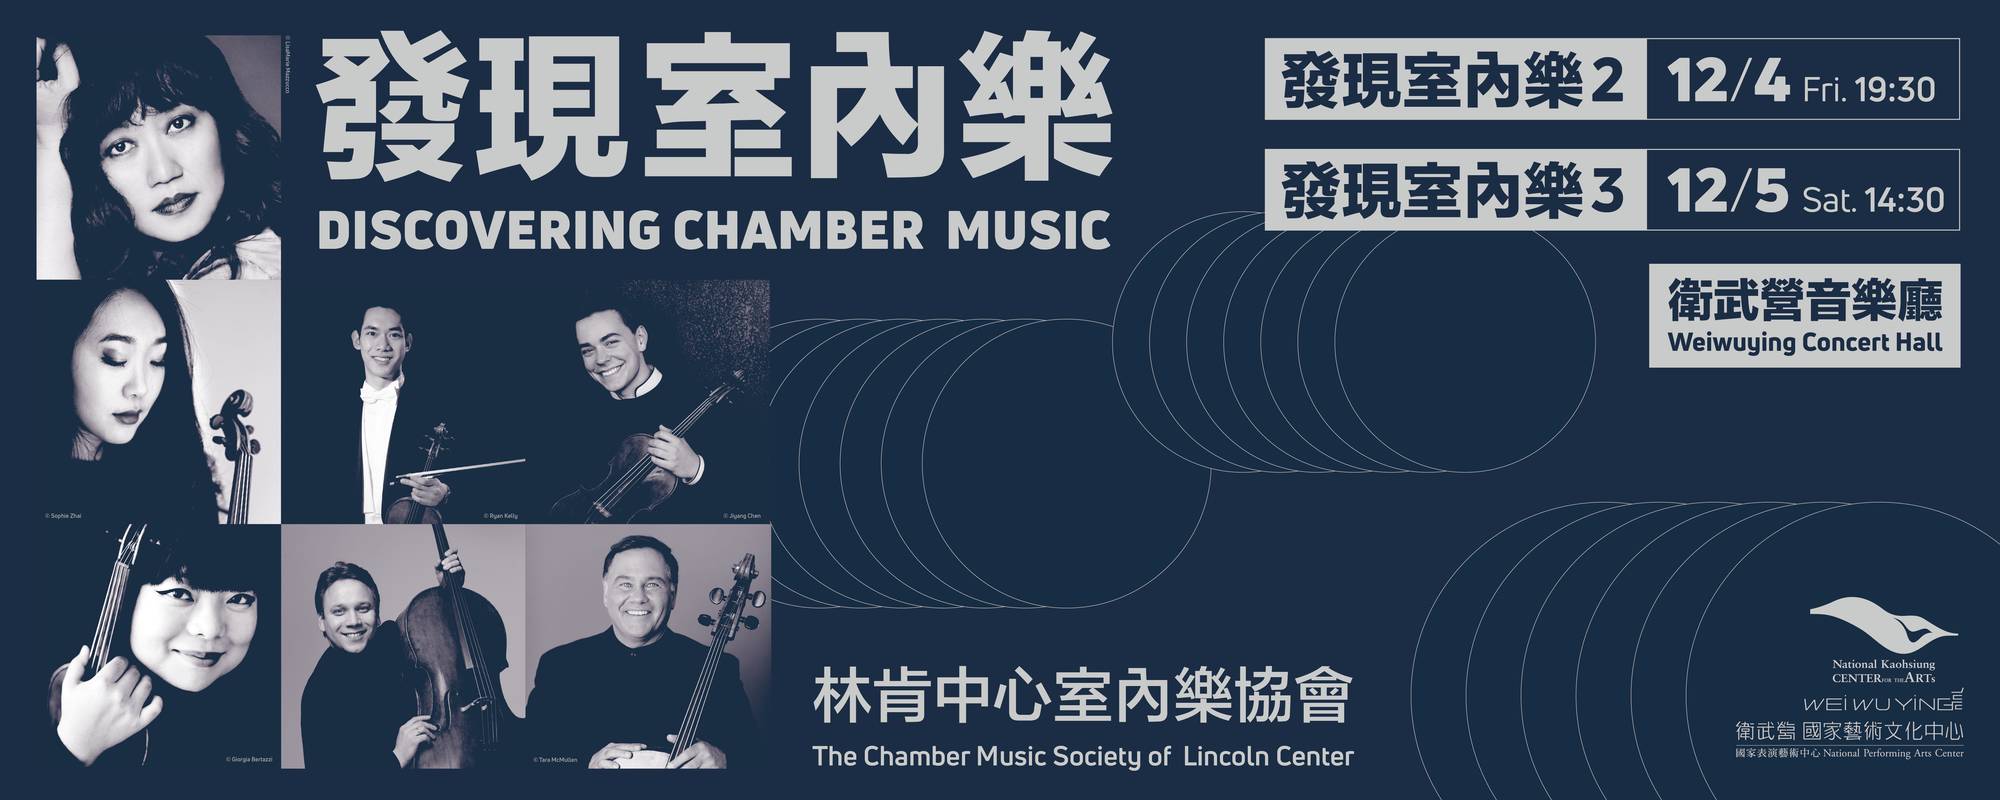 Discovering the Chamber Music 3 (Program changed）